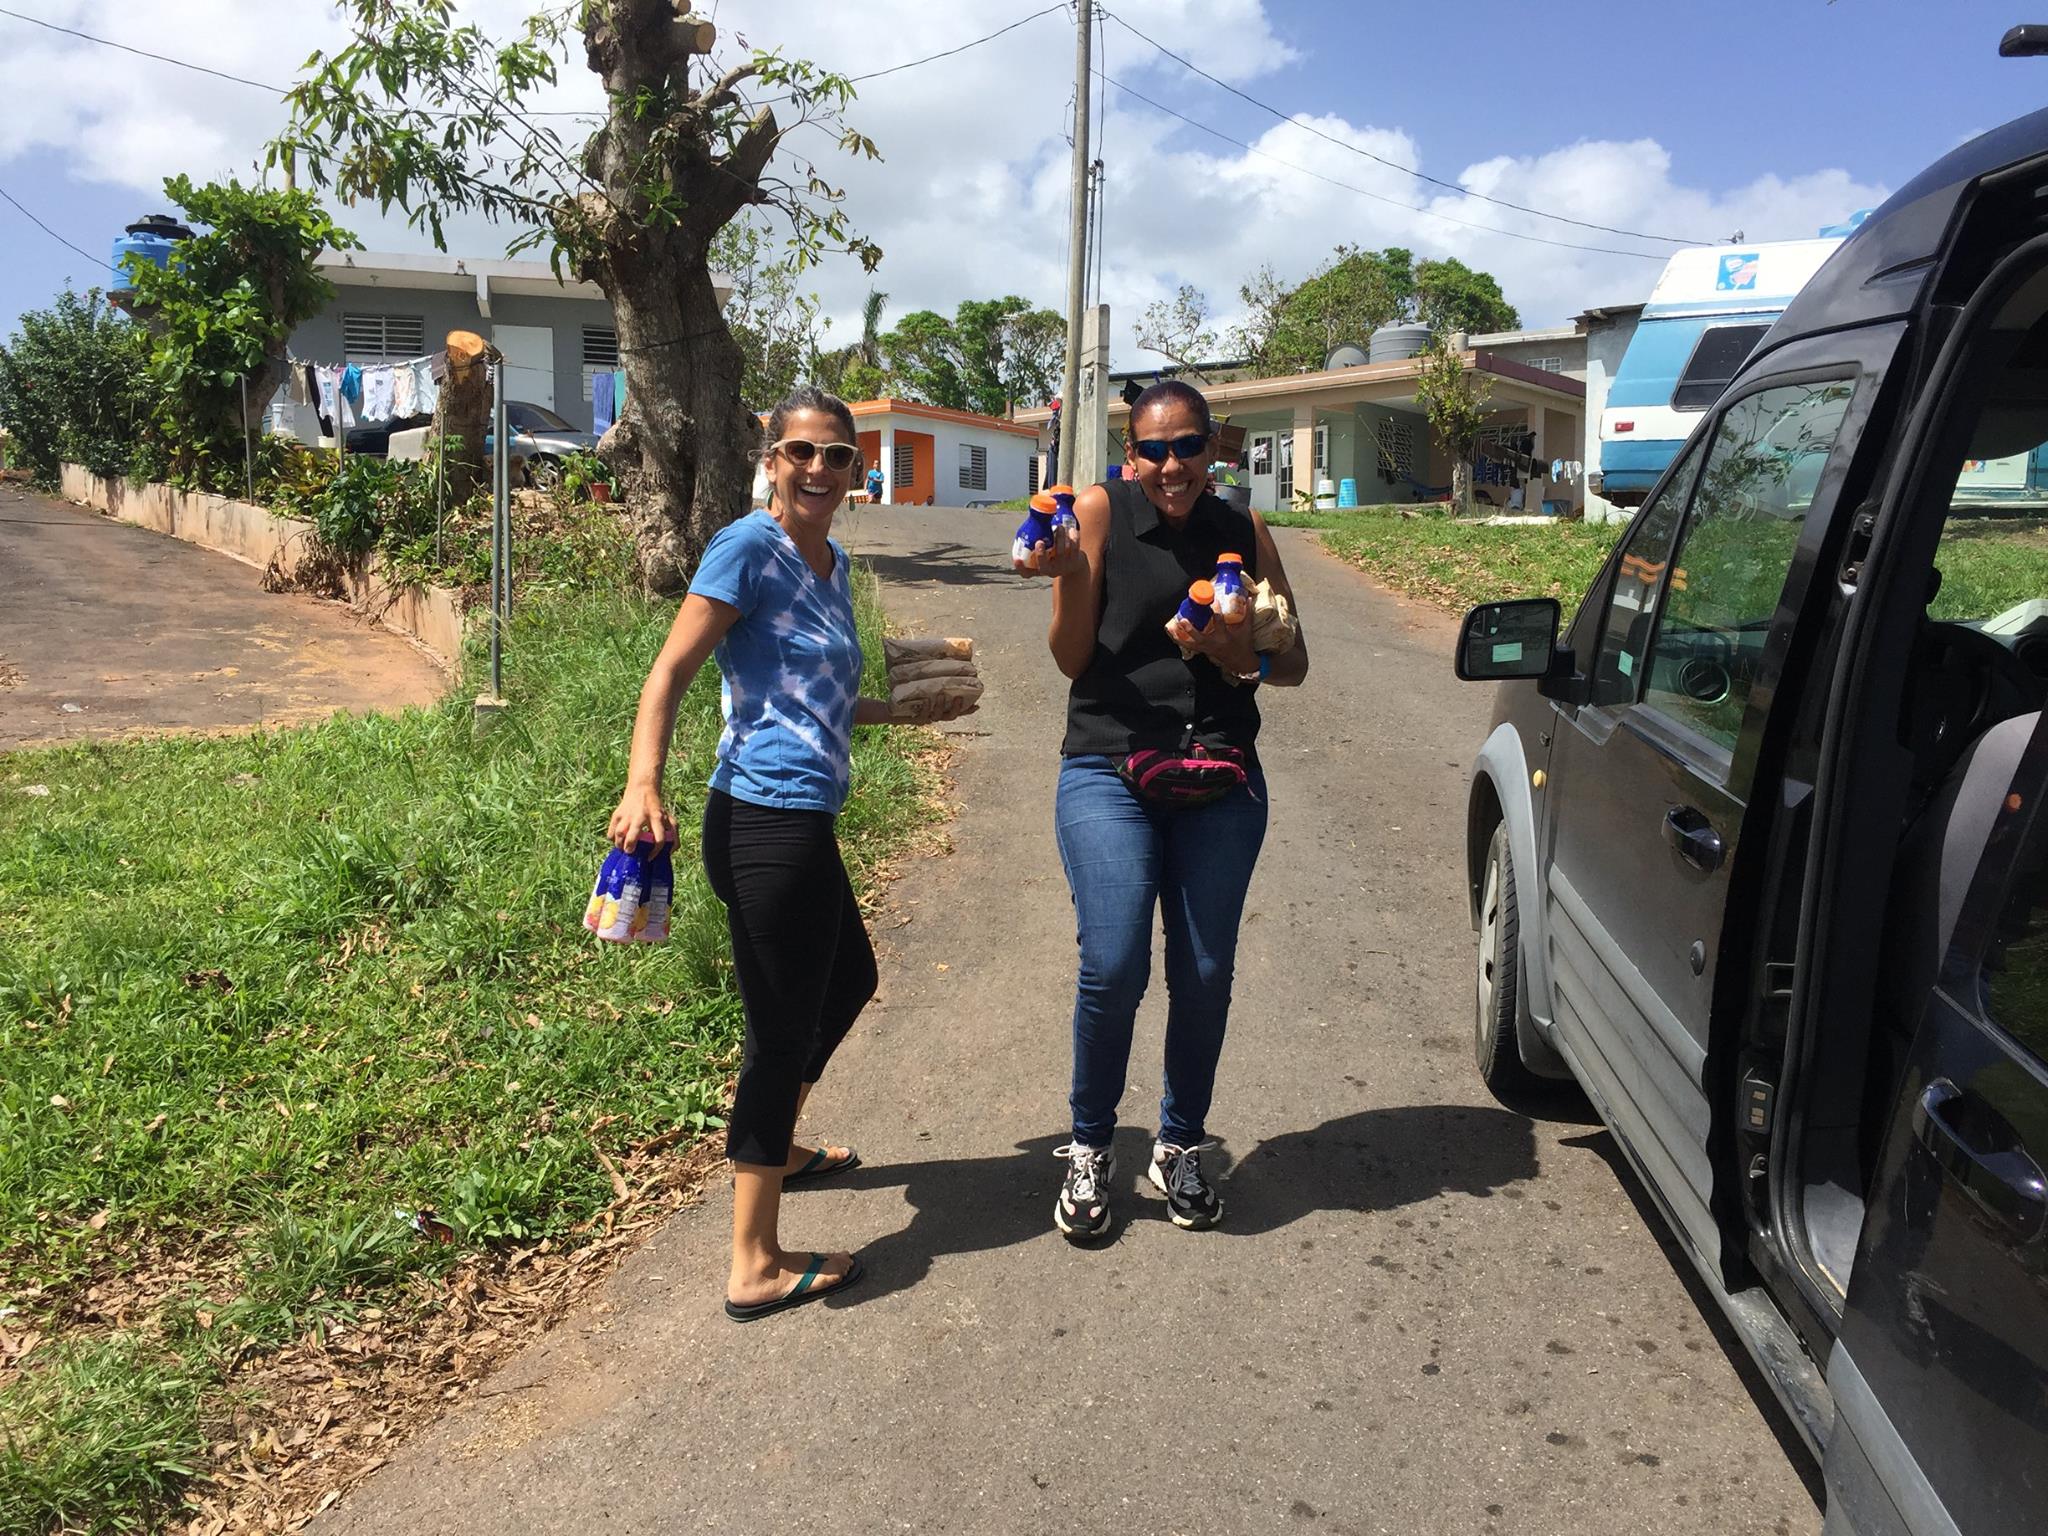 Vivienne Miranda + friend bringing food and drinks to neighborhoods in Anasco that have received no aid.